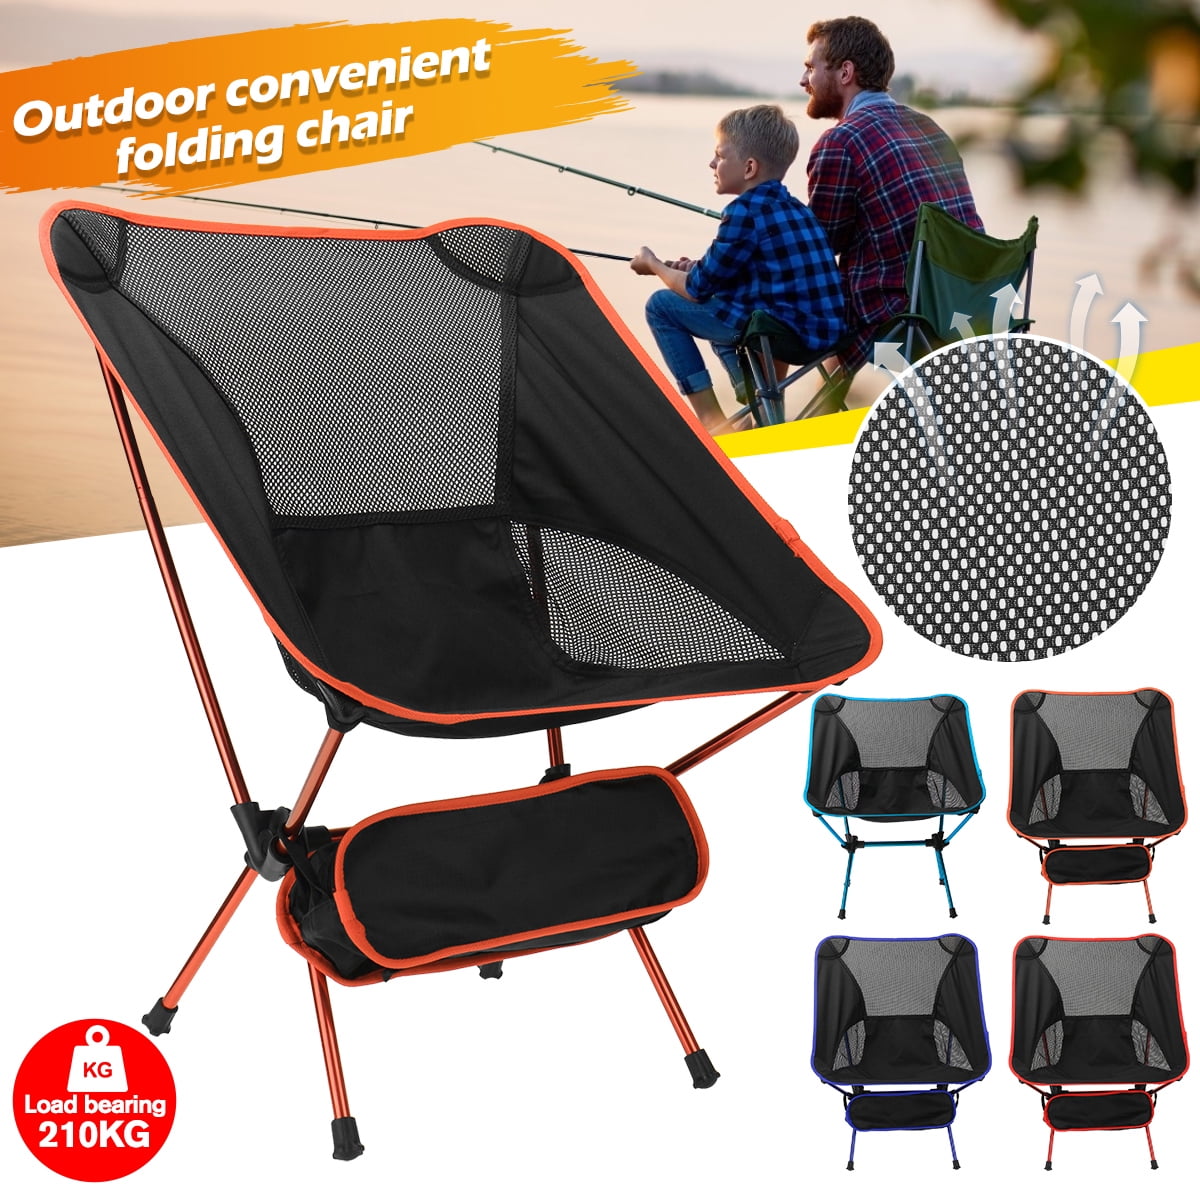 Details about   Outdoor Folding Camp Side Chair Mesh Seat Steel Frame Portable Compact Carry Bag 